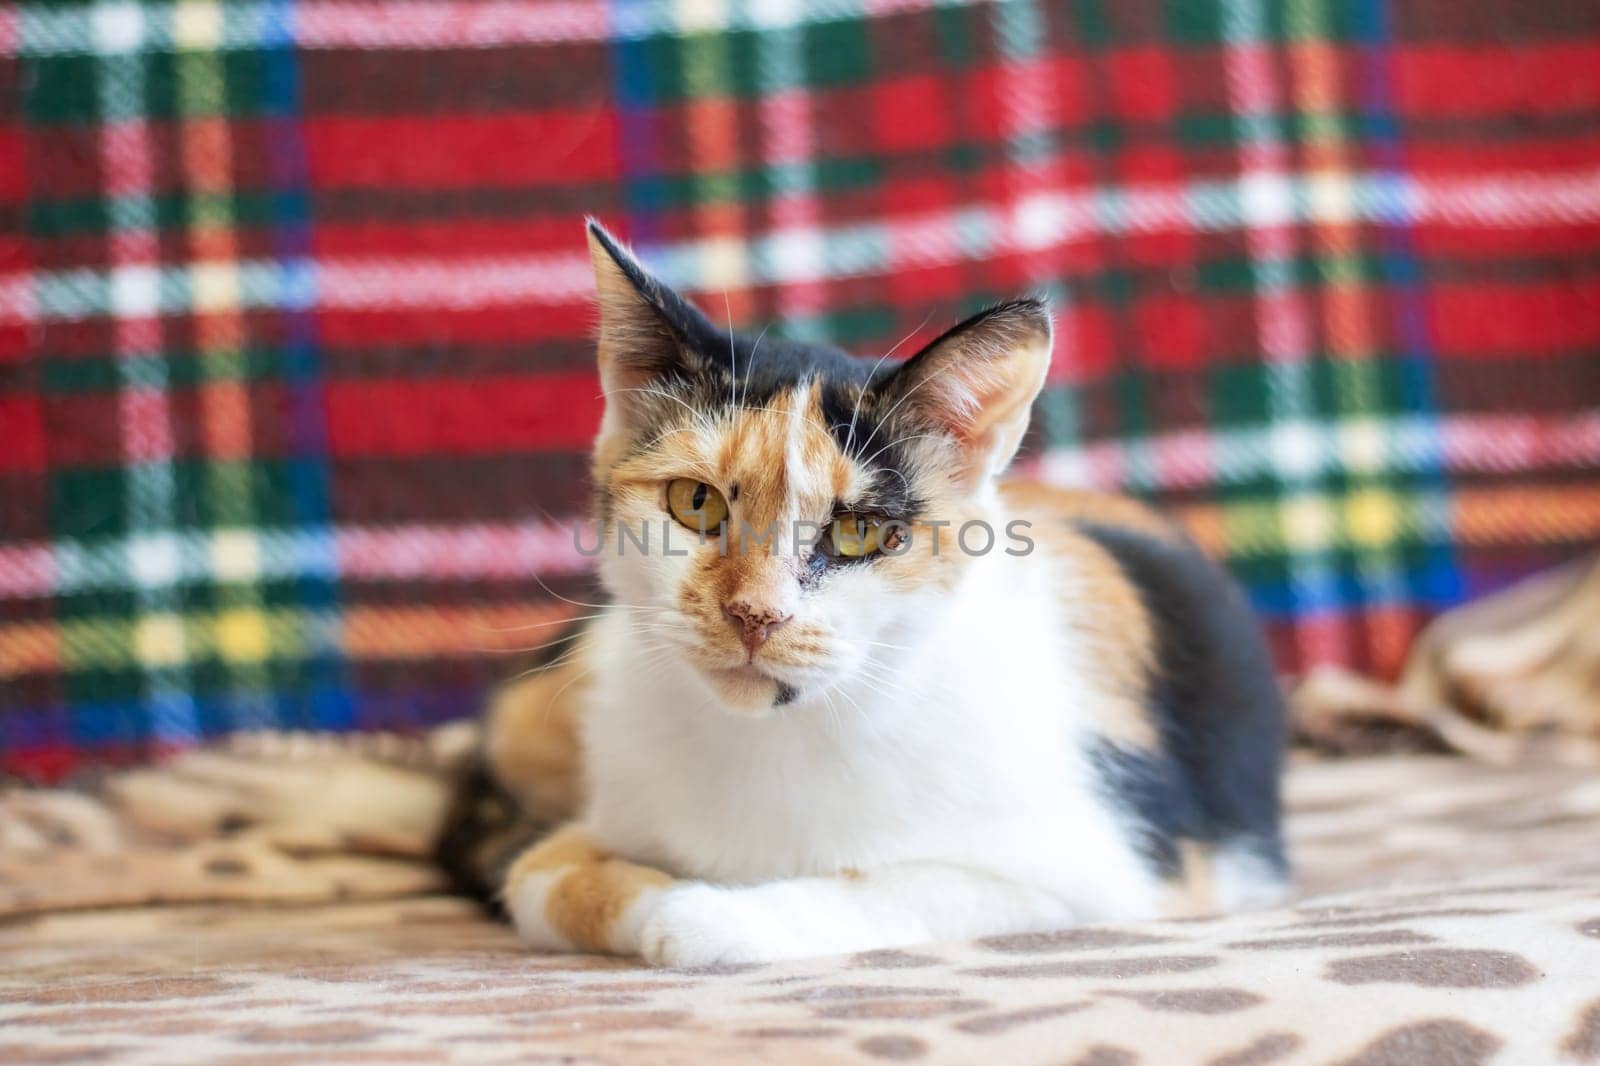 A Felidae carnivore with whiskers, a snout, and fur is resting on a plaid blanket. The cat is small to mediumsized, with a calico pattern